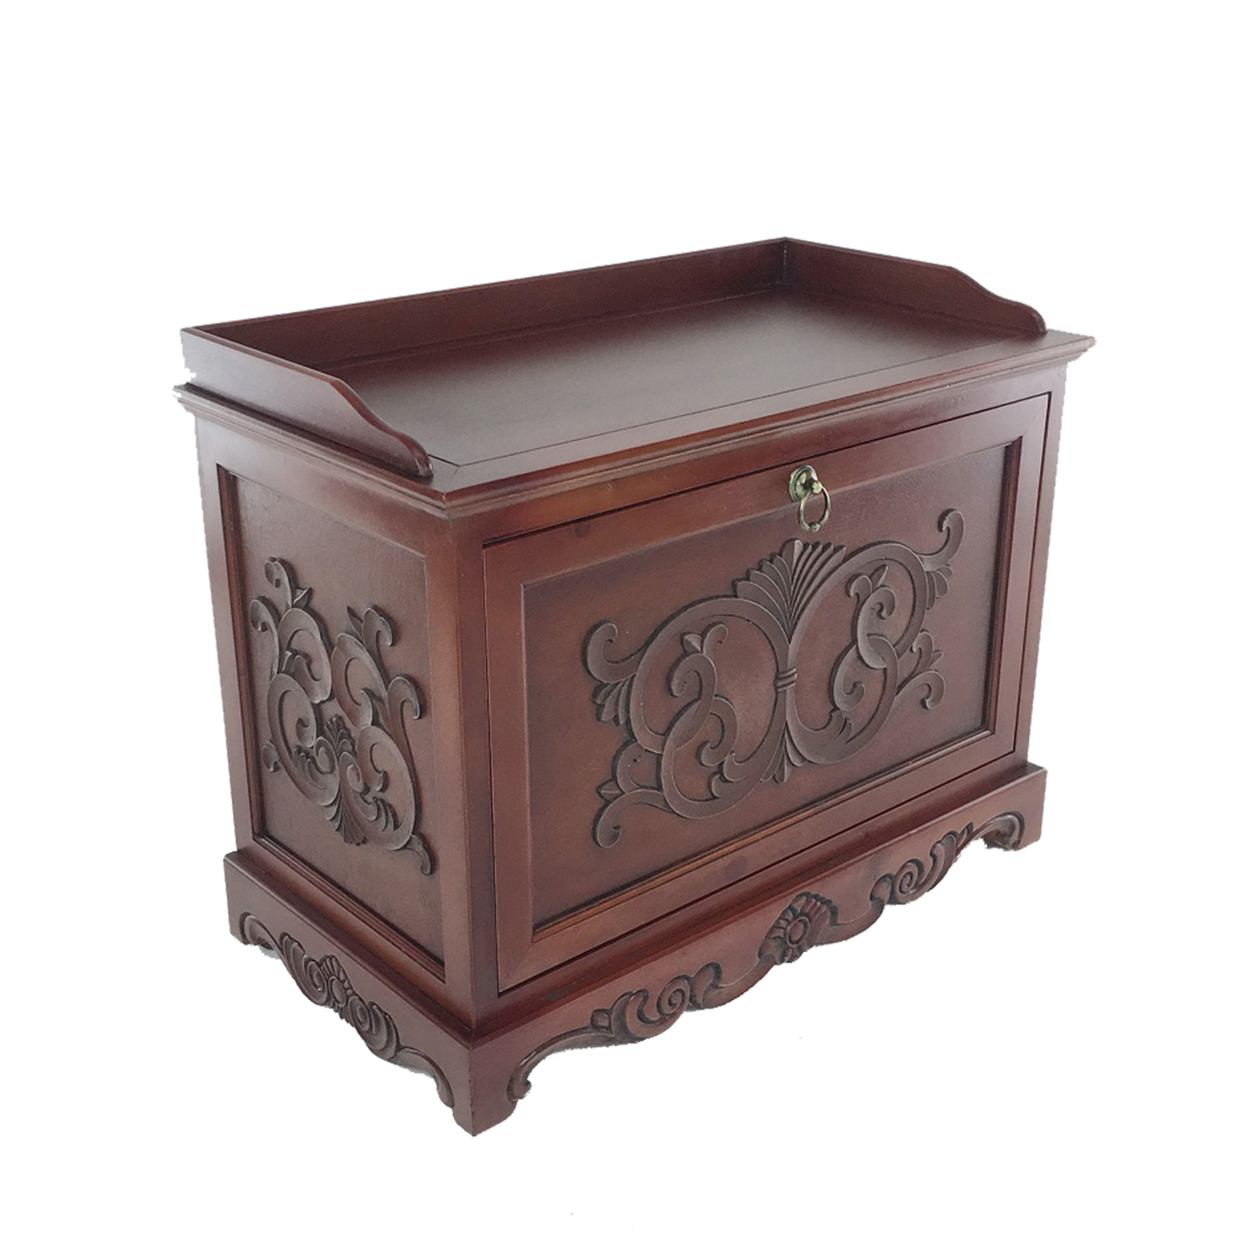 Engraved Wooden Shoe Cabinet With Drop Down Opening And Metal Hinges, Brown- Saltoro Sherpi